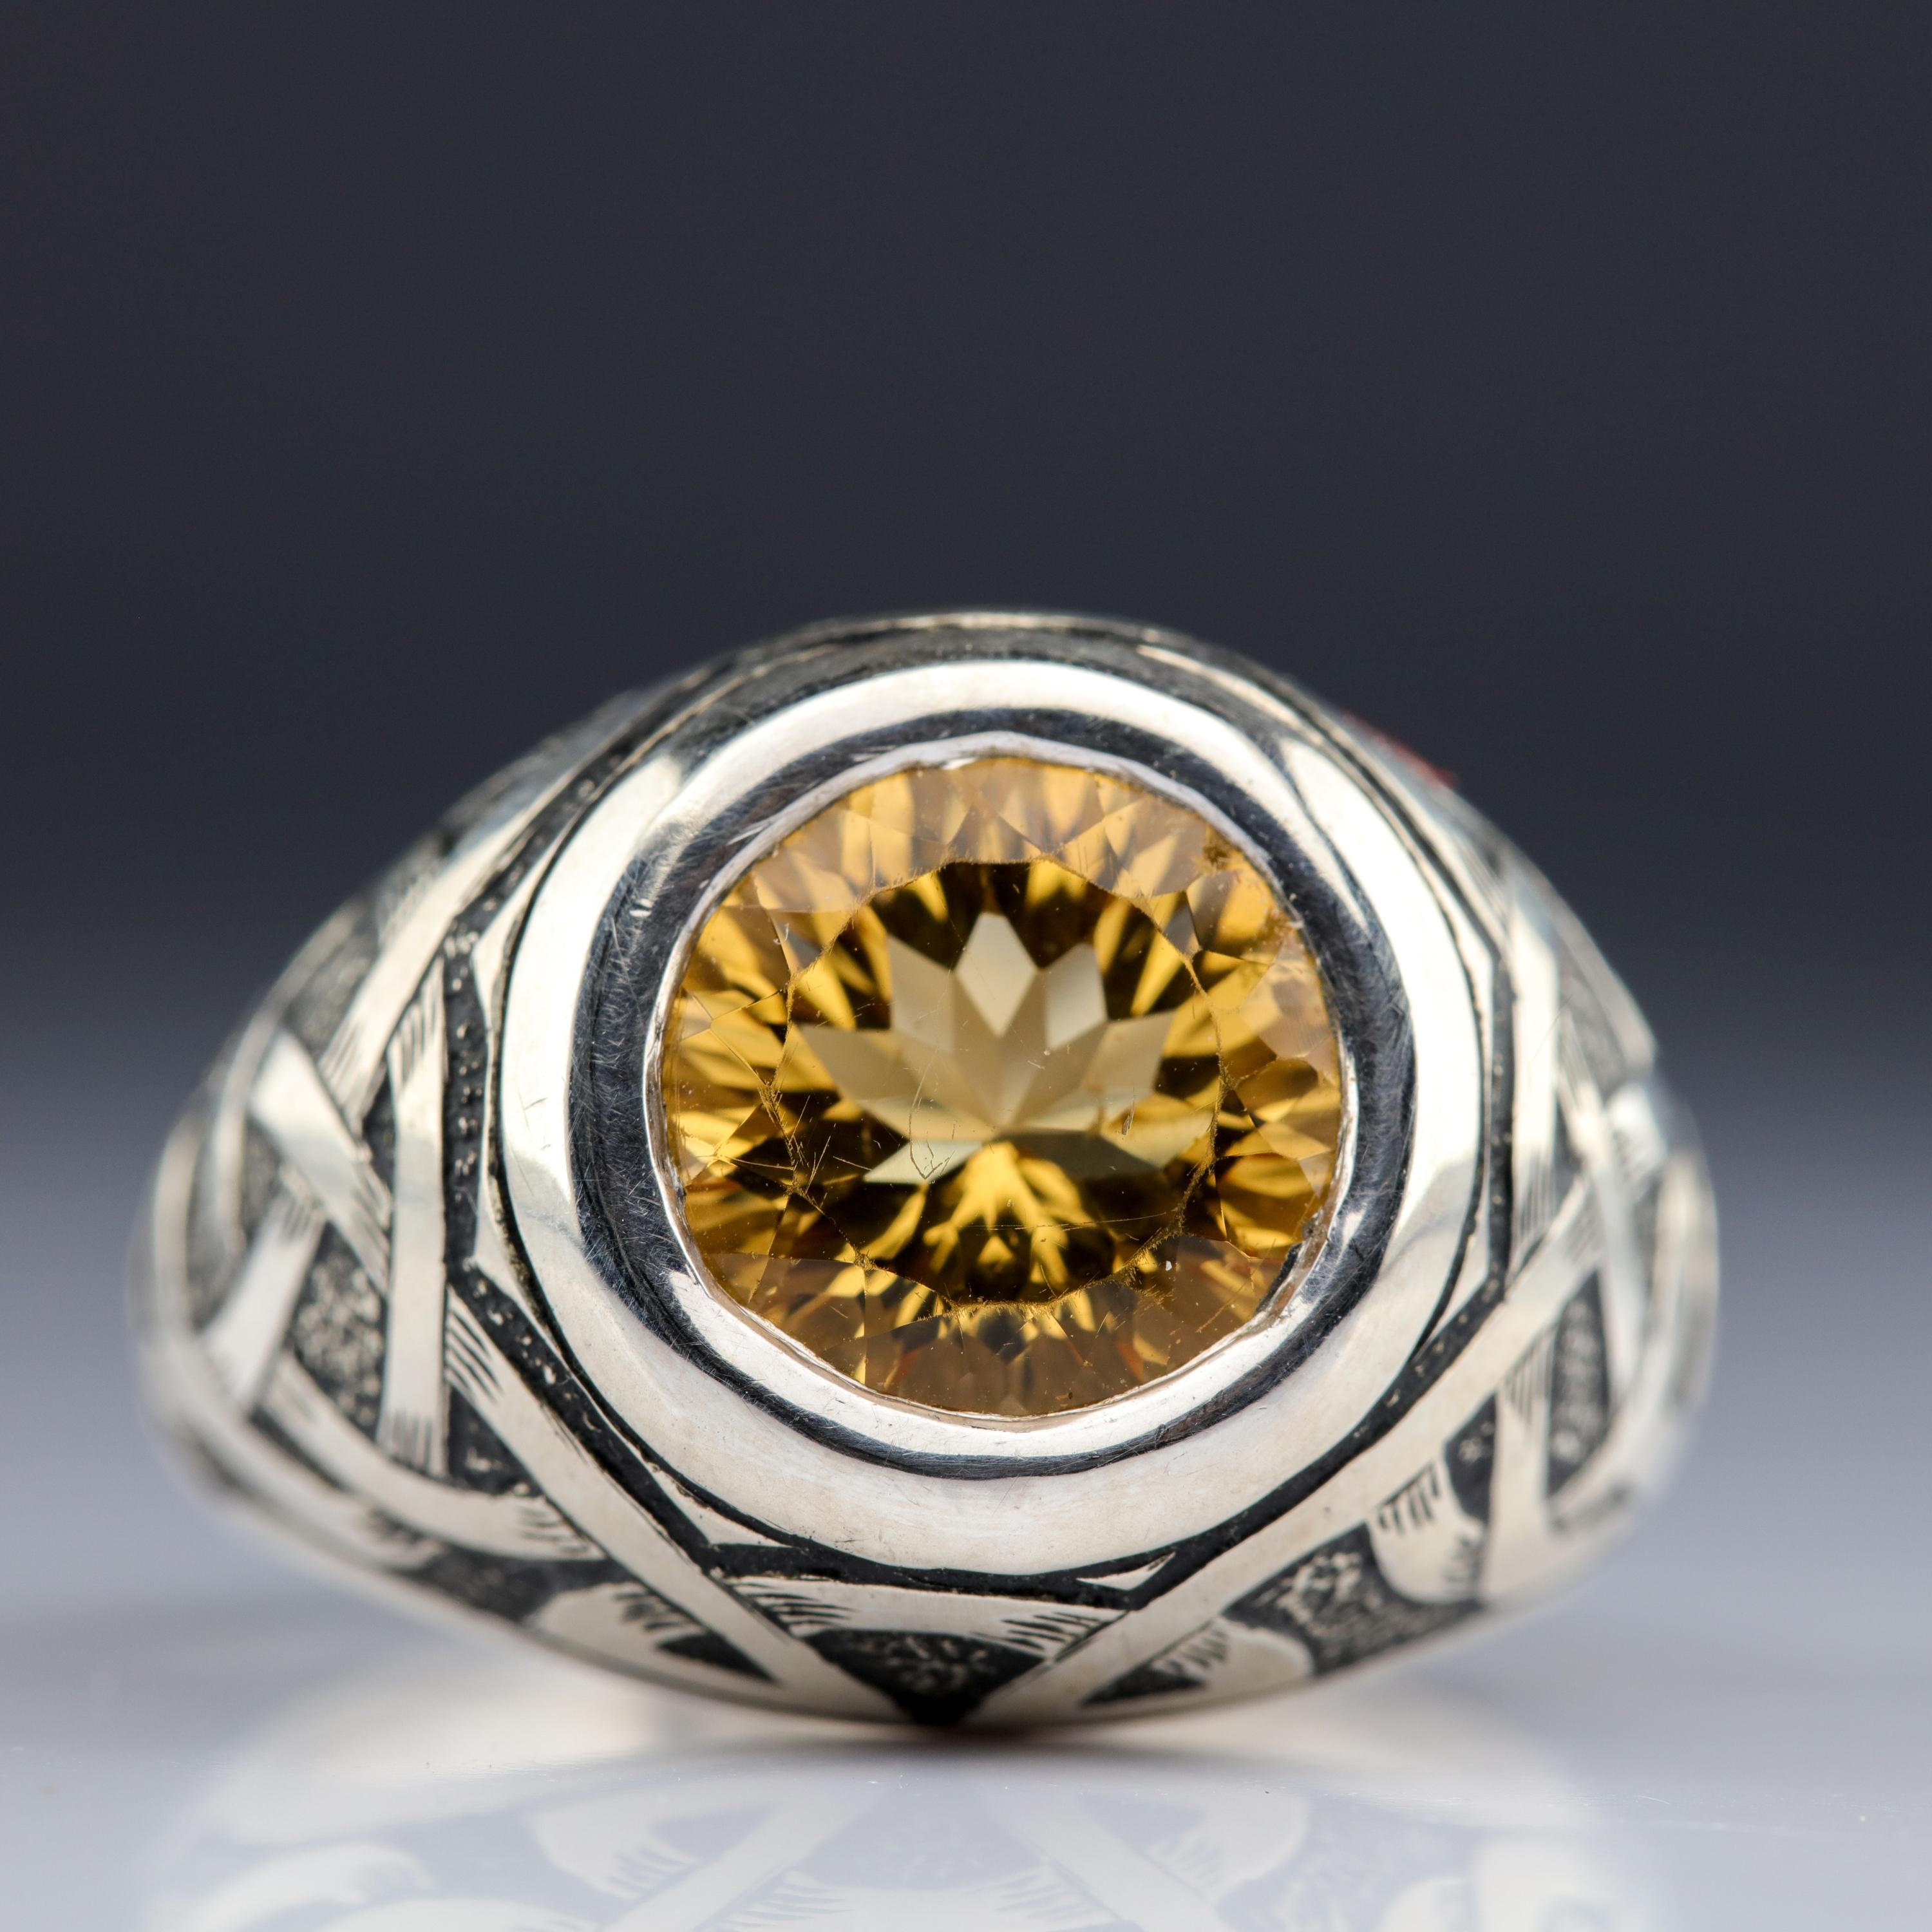 This men's citrine ring will absolutely survive the zombie apocalypse. It's 36 grams—that's one-and-a-quarter ounce—of ring. A round, beautifully faceted custom-cut citrine is bezel-set front and center, and at 11. 75 mm in diameter, weighs in at a